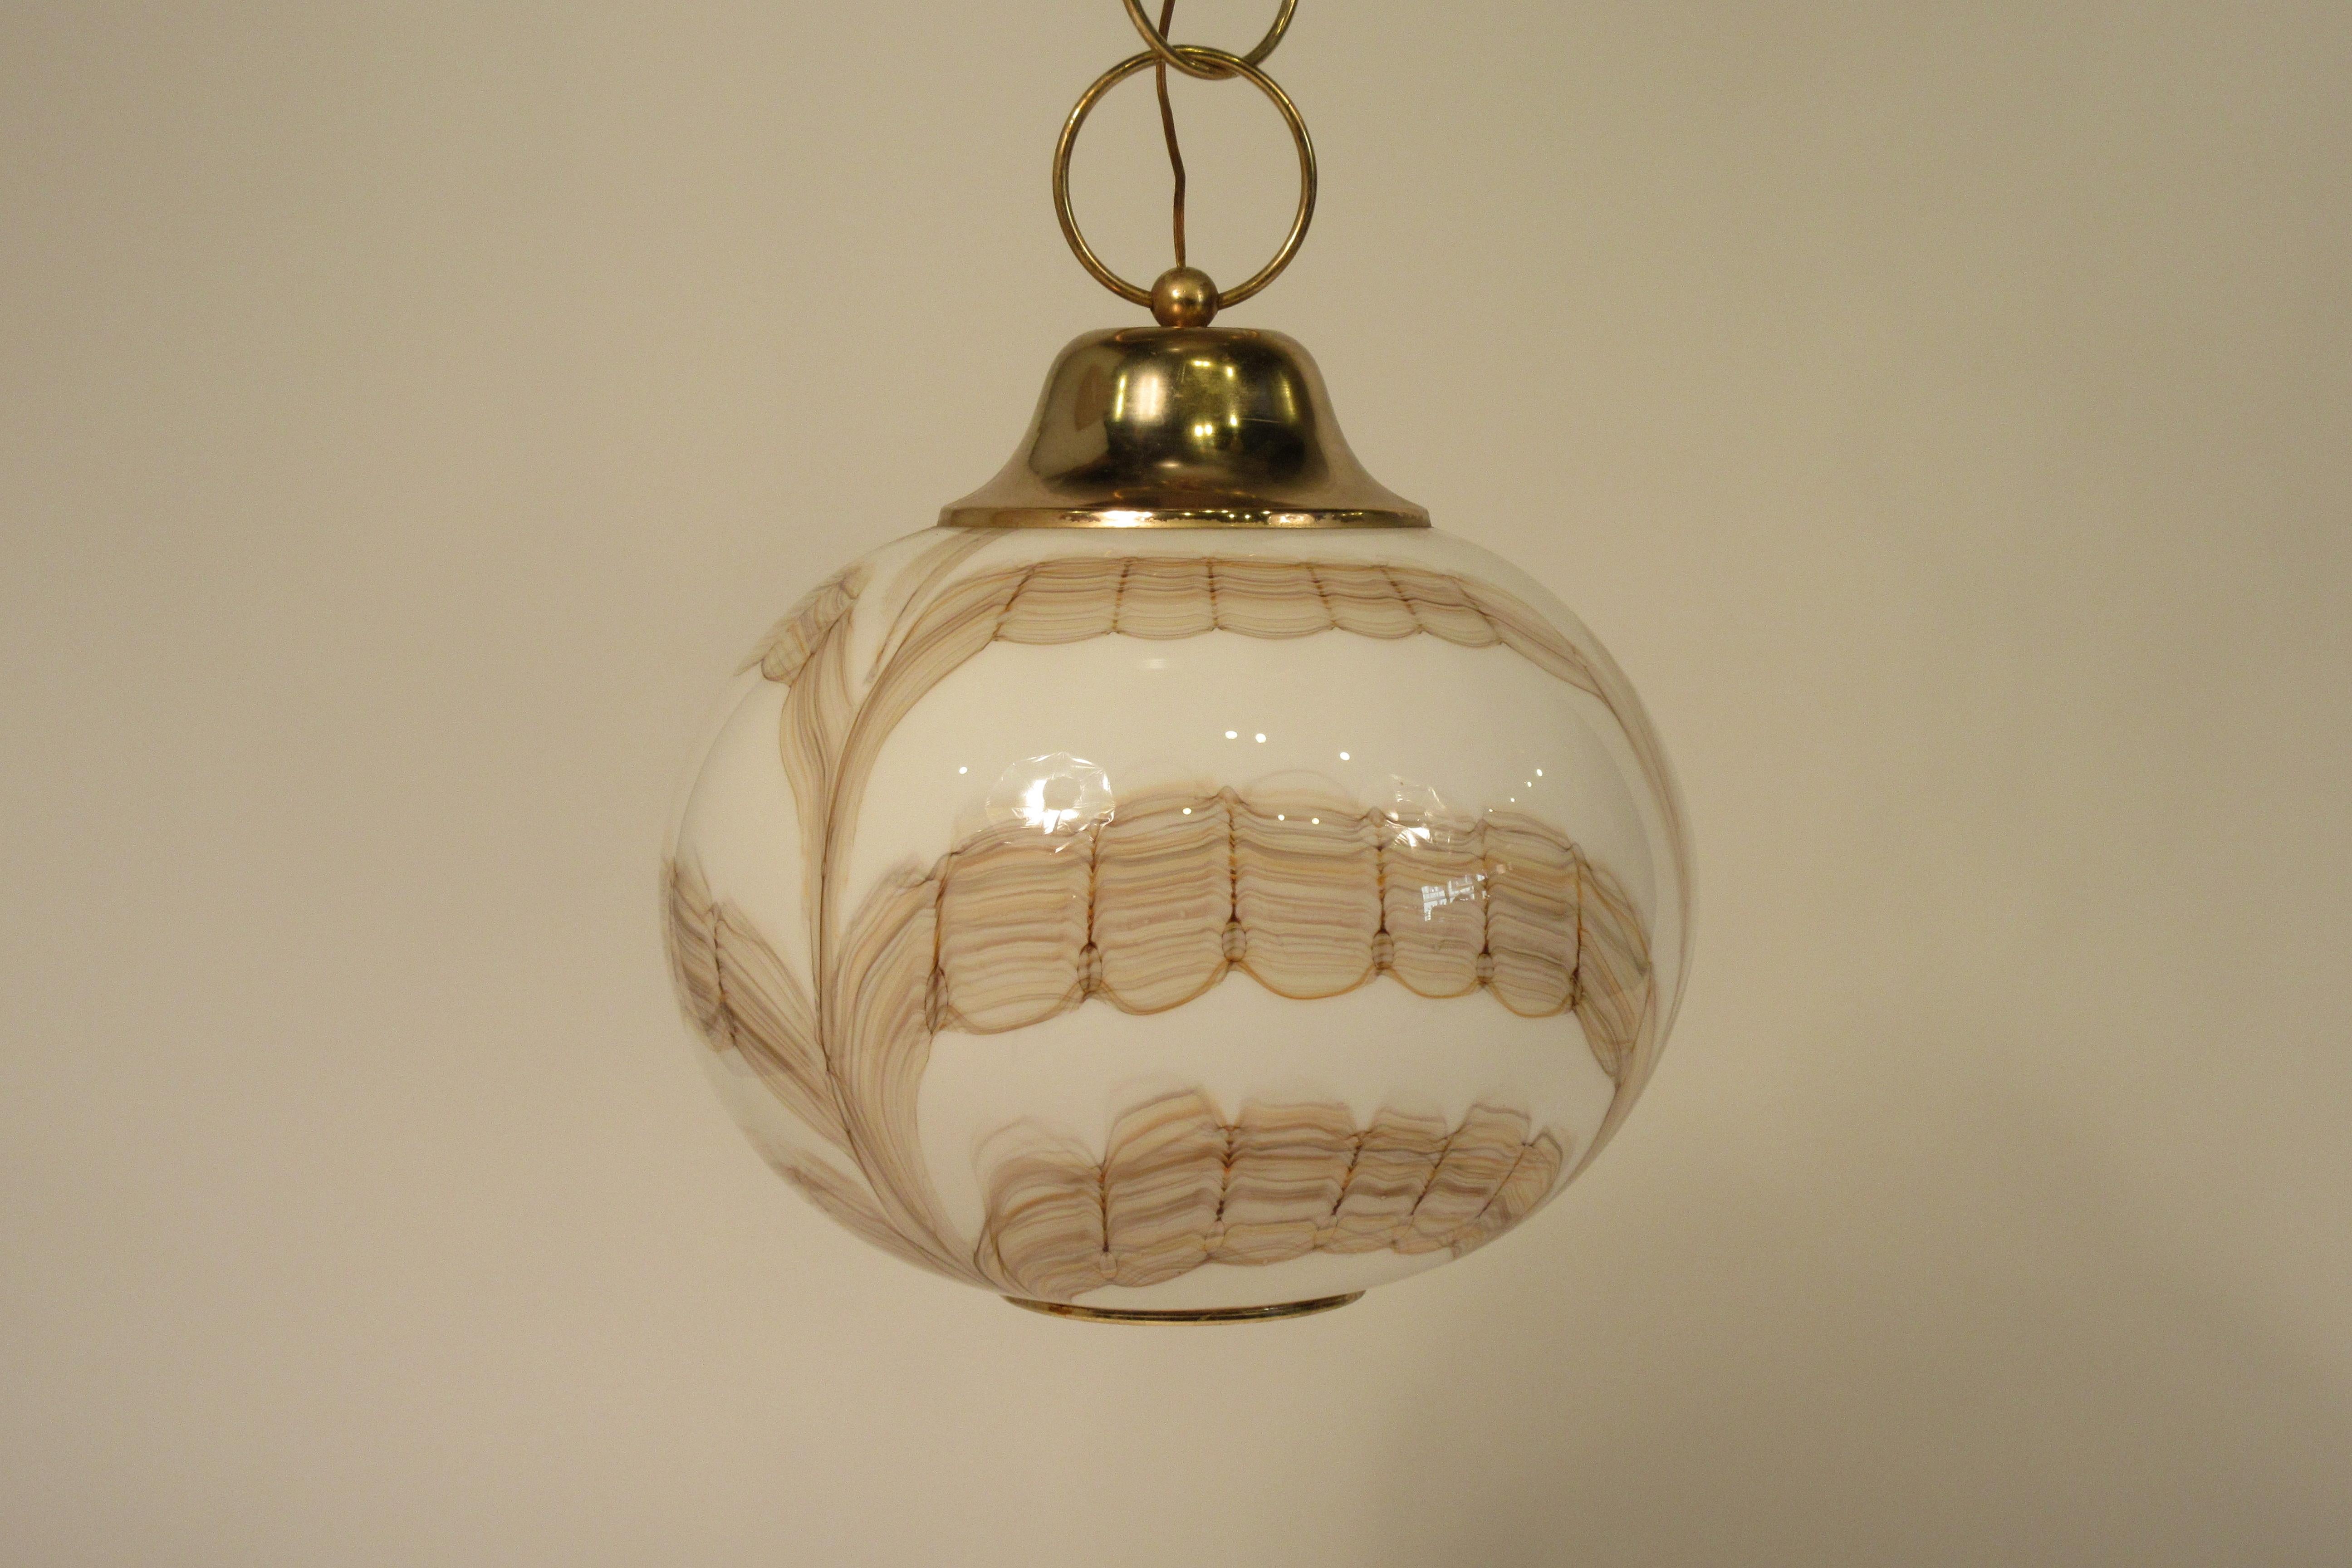 1970s Italian Murano glass ball fixture, with brass accents. Some wear to brass.
Each ring is 4.25”.